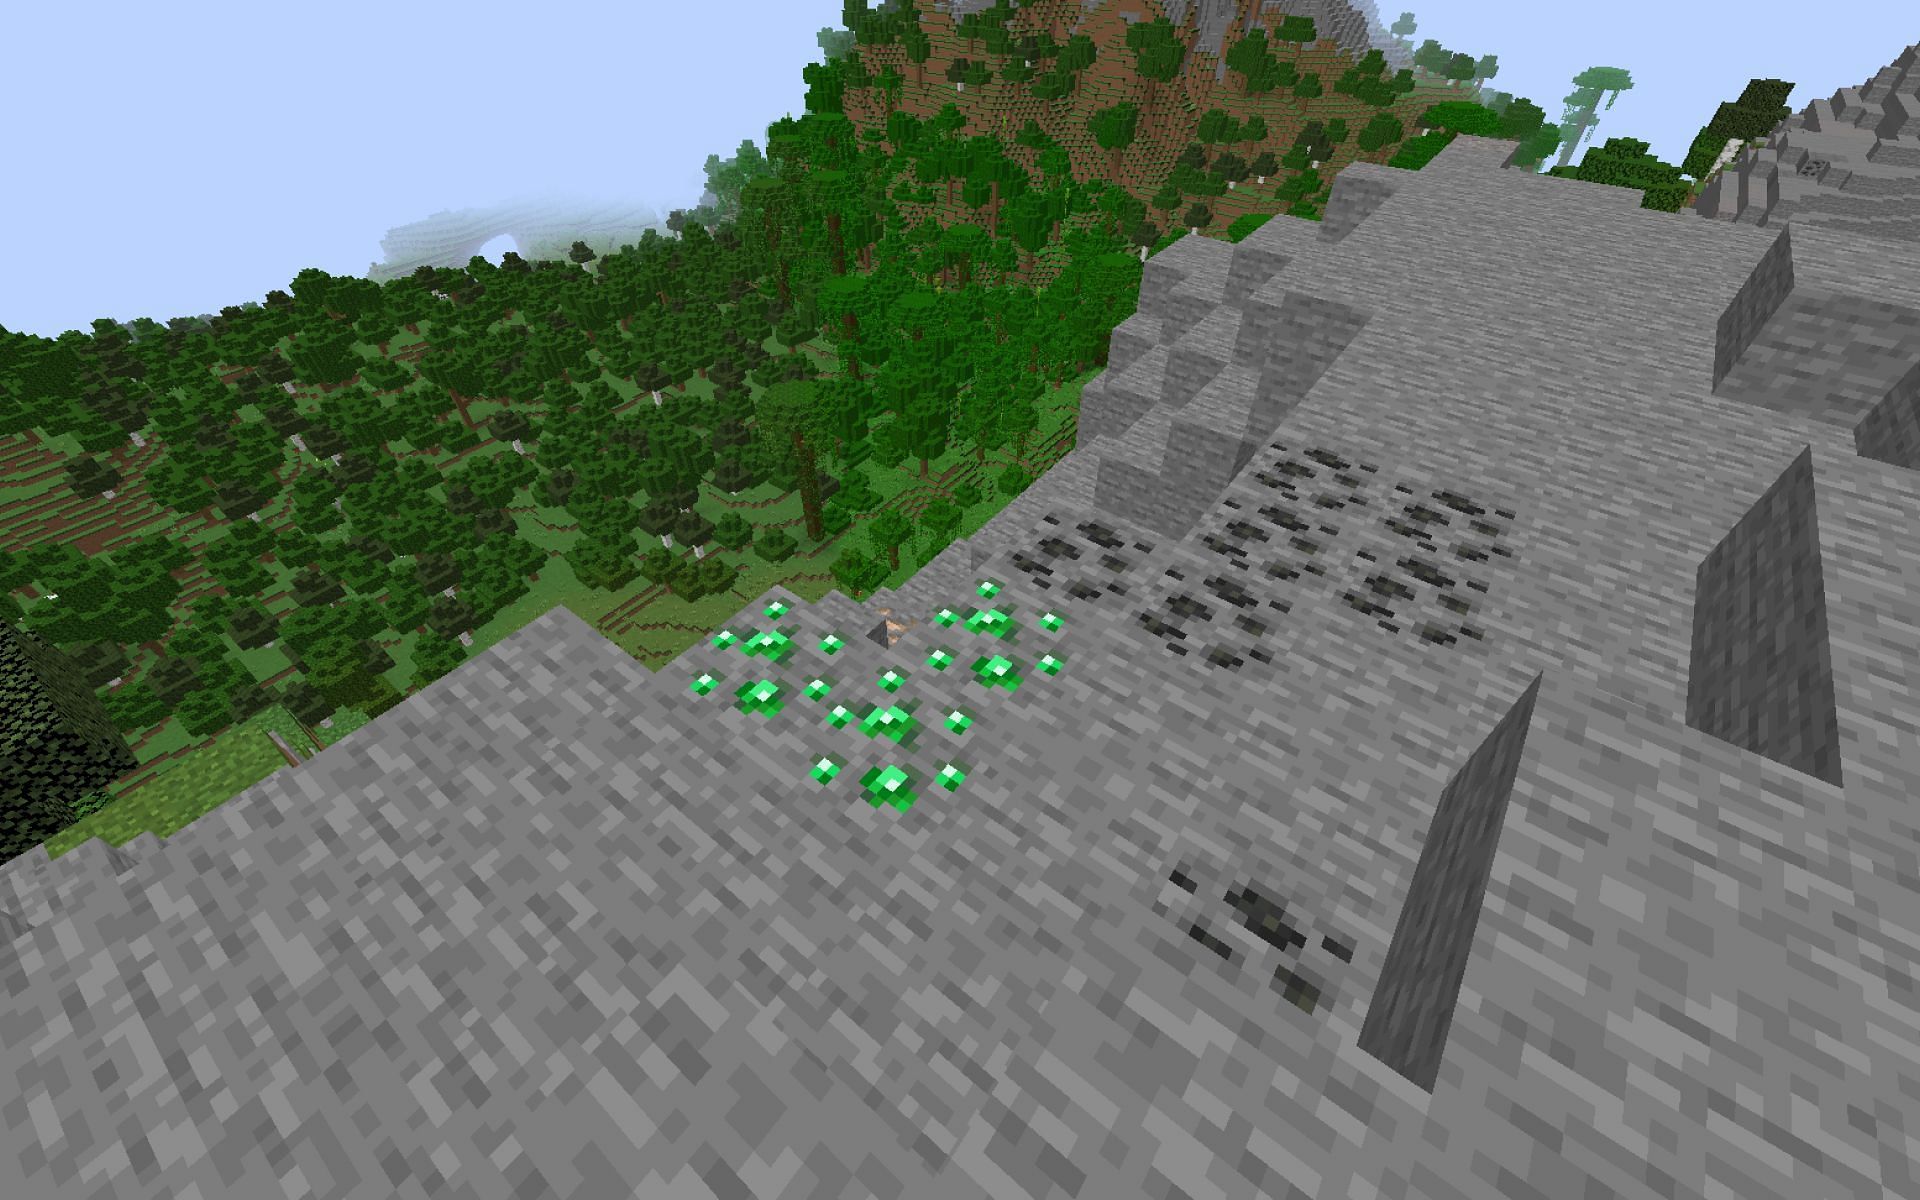 Several exposed emerald ore can be found in this world seed. (Image via Minecraft)